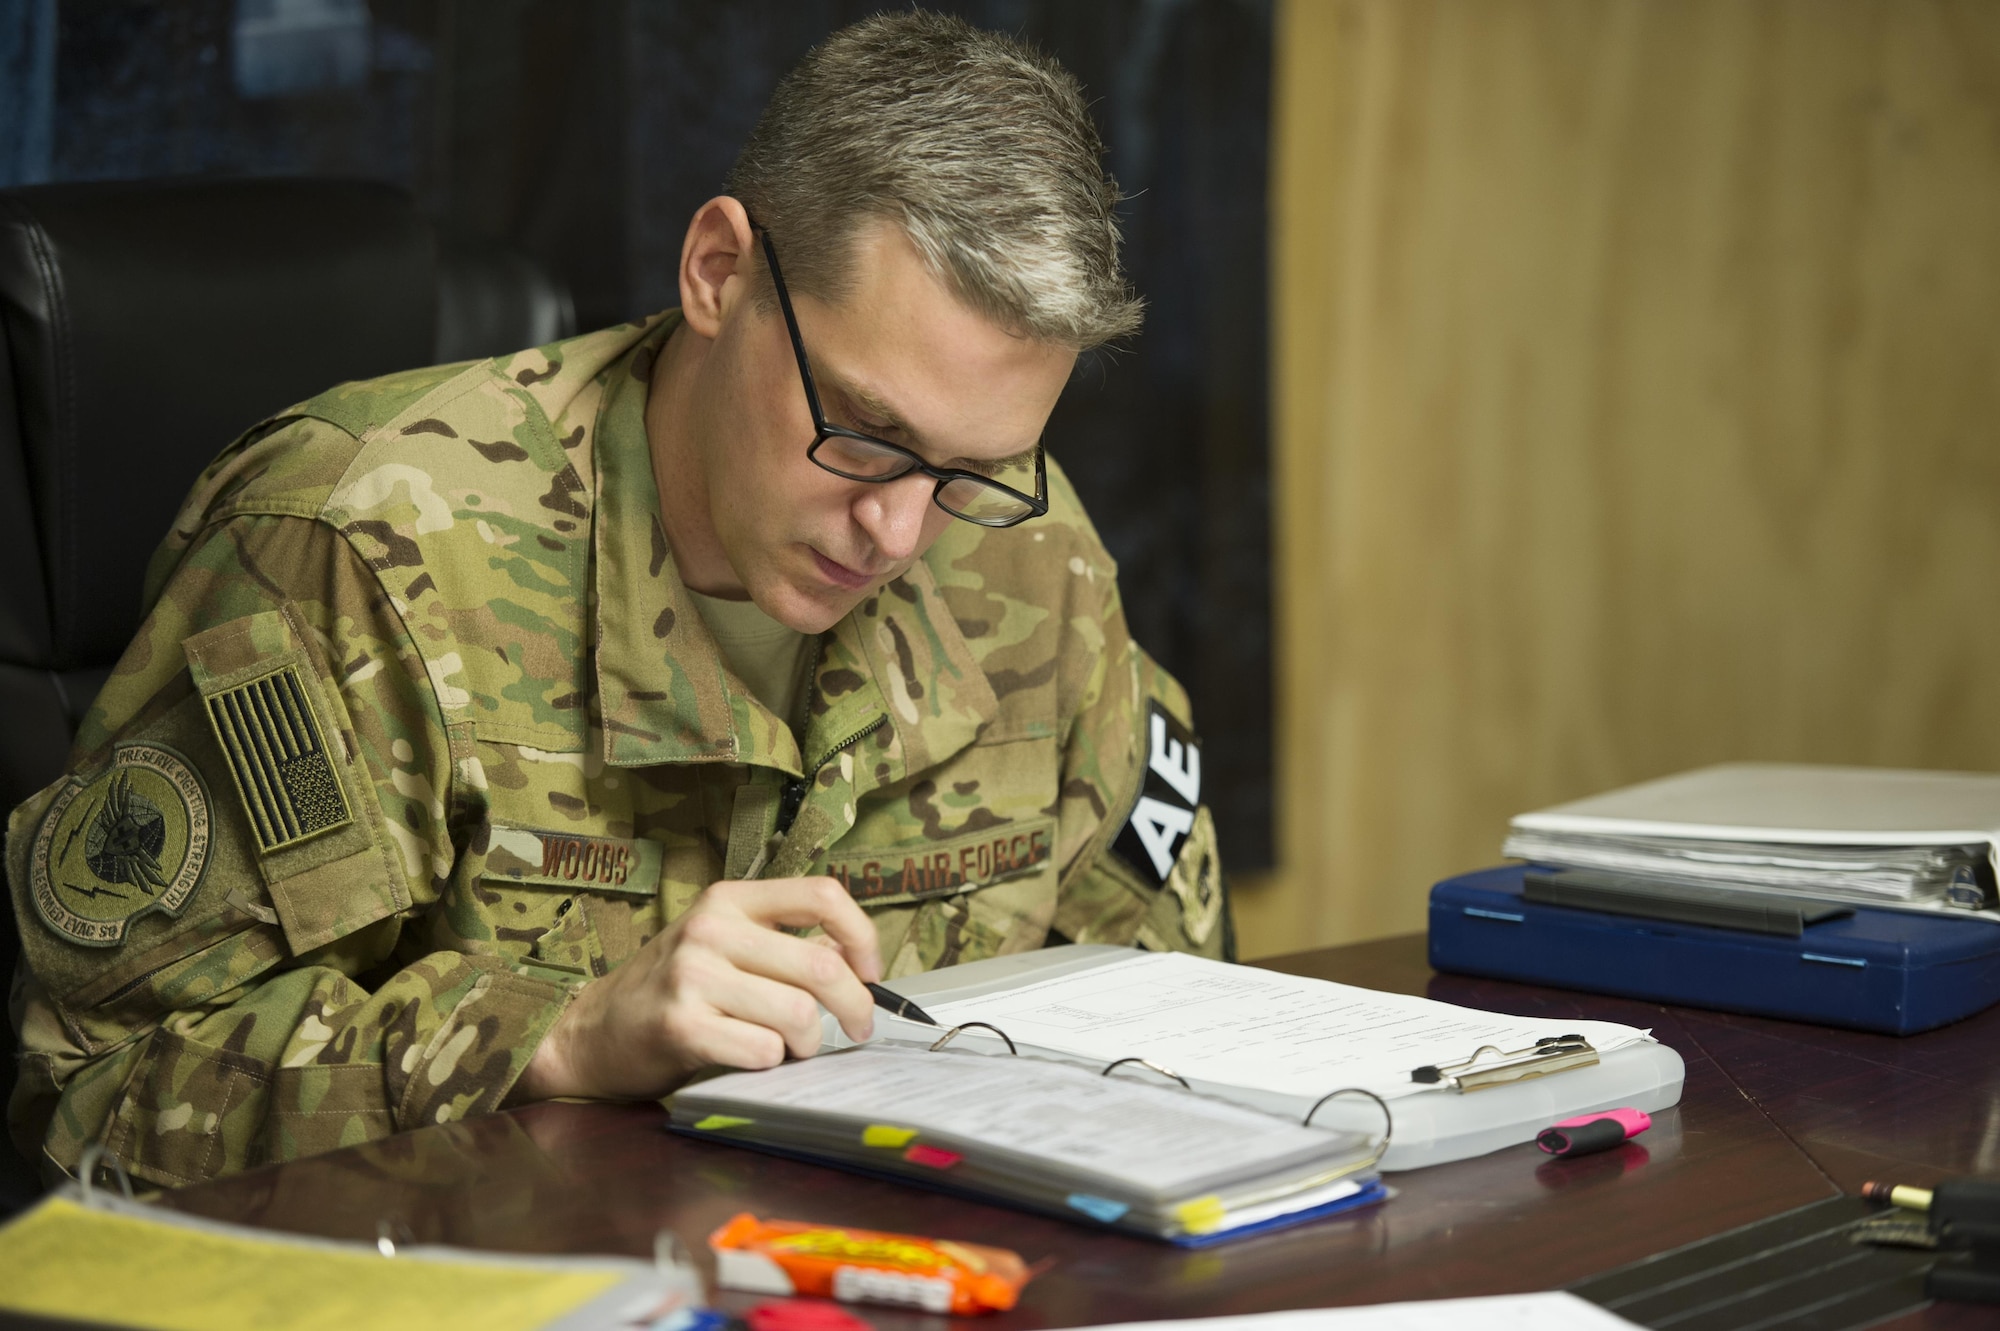 Capt. Steven Woods, 455th Expeditionary Aeromedical Evacuation Squadron flight nurse, deployed from the 43rd AES at Pope Army Airfield, N.C., reviews a checklist during a crew brief for a medevac alert at Bagram Airfield, Afghanistan, Nov. 6, 2015. The 455th EAES is tasked with moving injured and sick patients to locations with higher levels of medical care. (U.S. Air Force photo by Tech. Sgt. Robert Cloys/RELEASED)